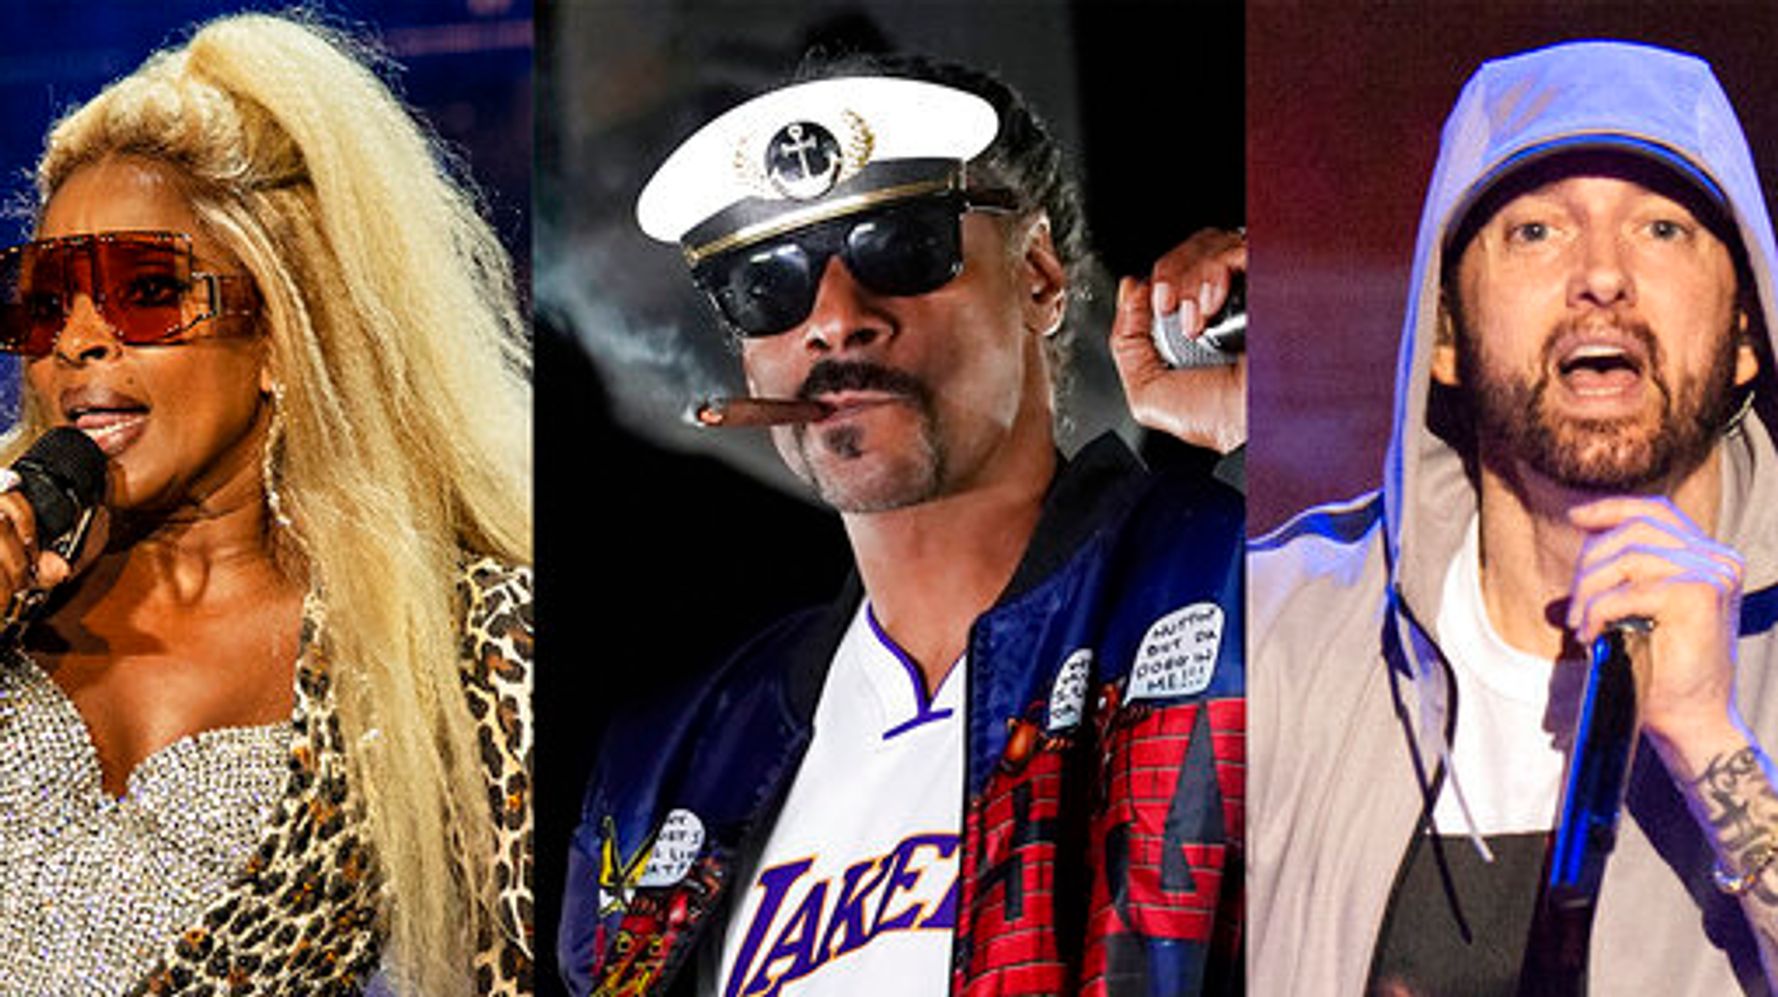 Mary K. Blige, Snoop Dogg, Eminem Among Rappers Performing At Super Bowl